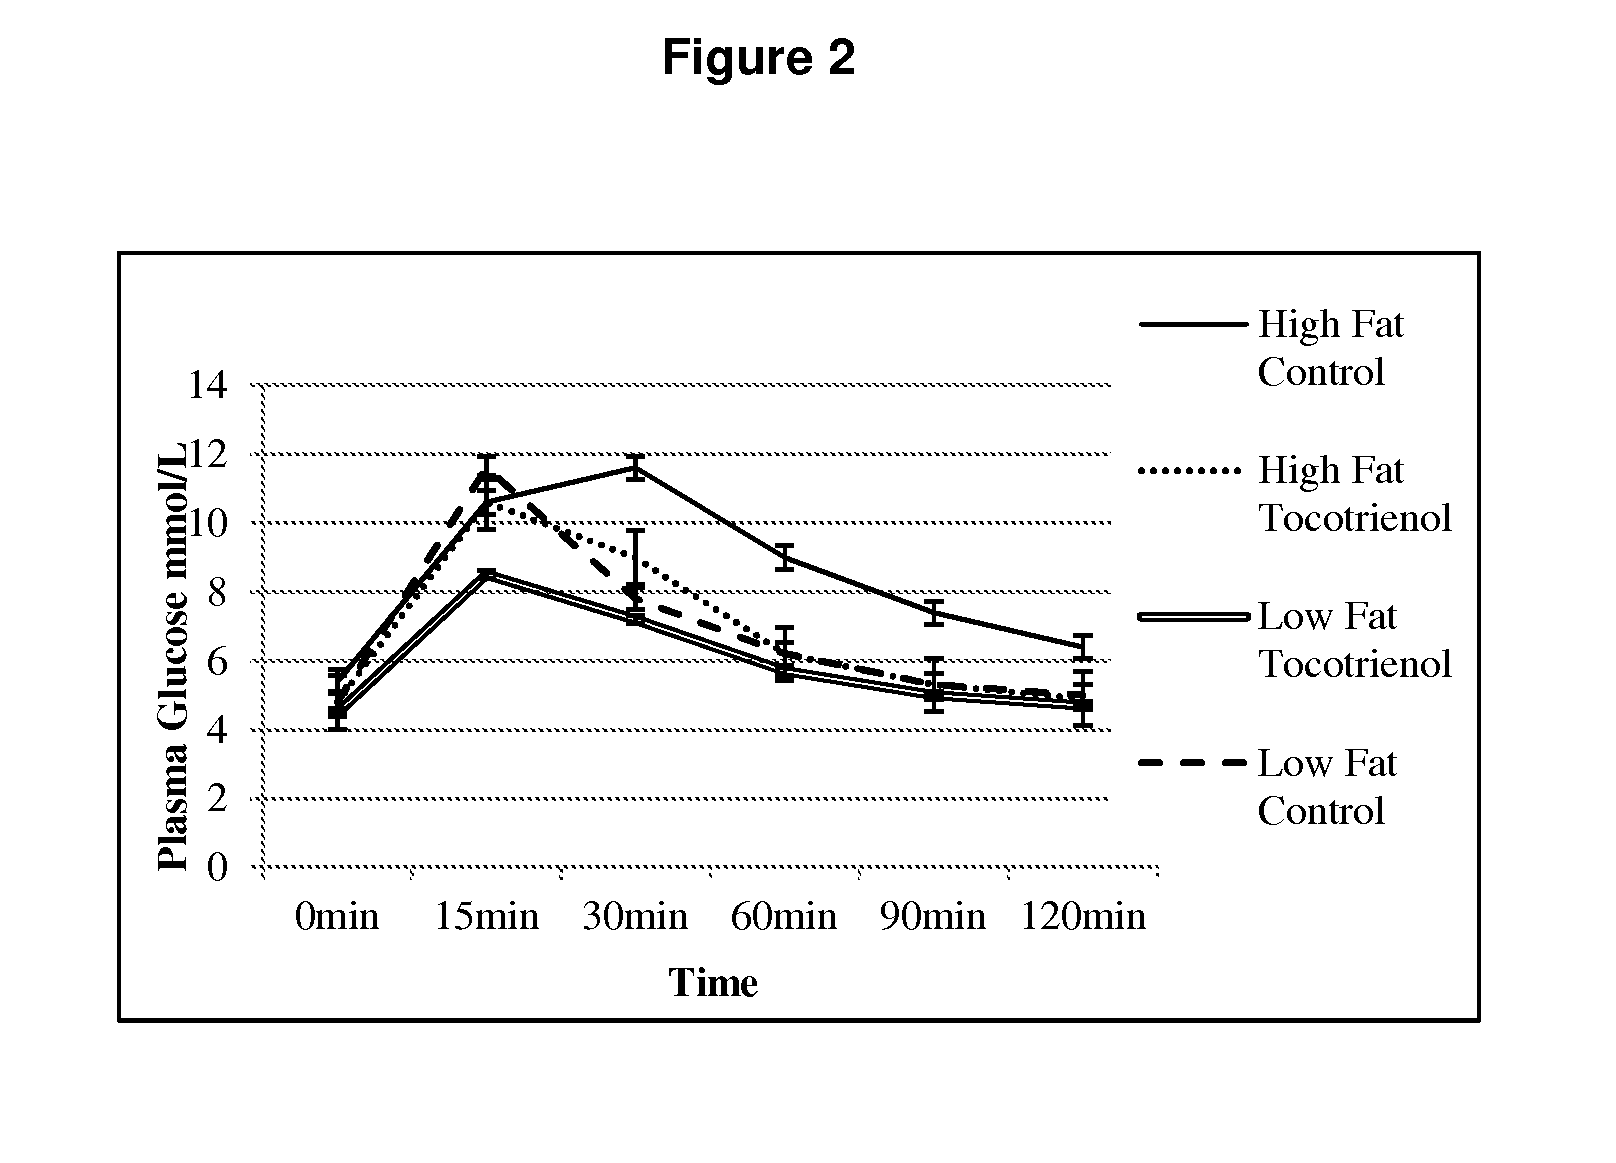 Transmucosal delivery of tocotrienol